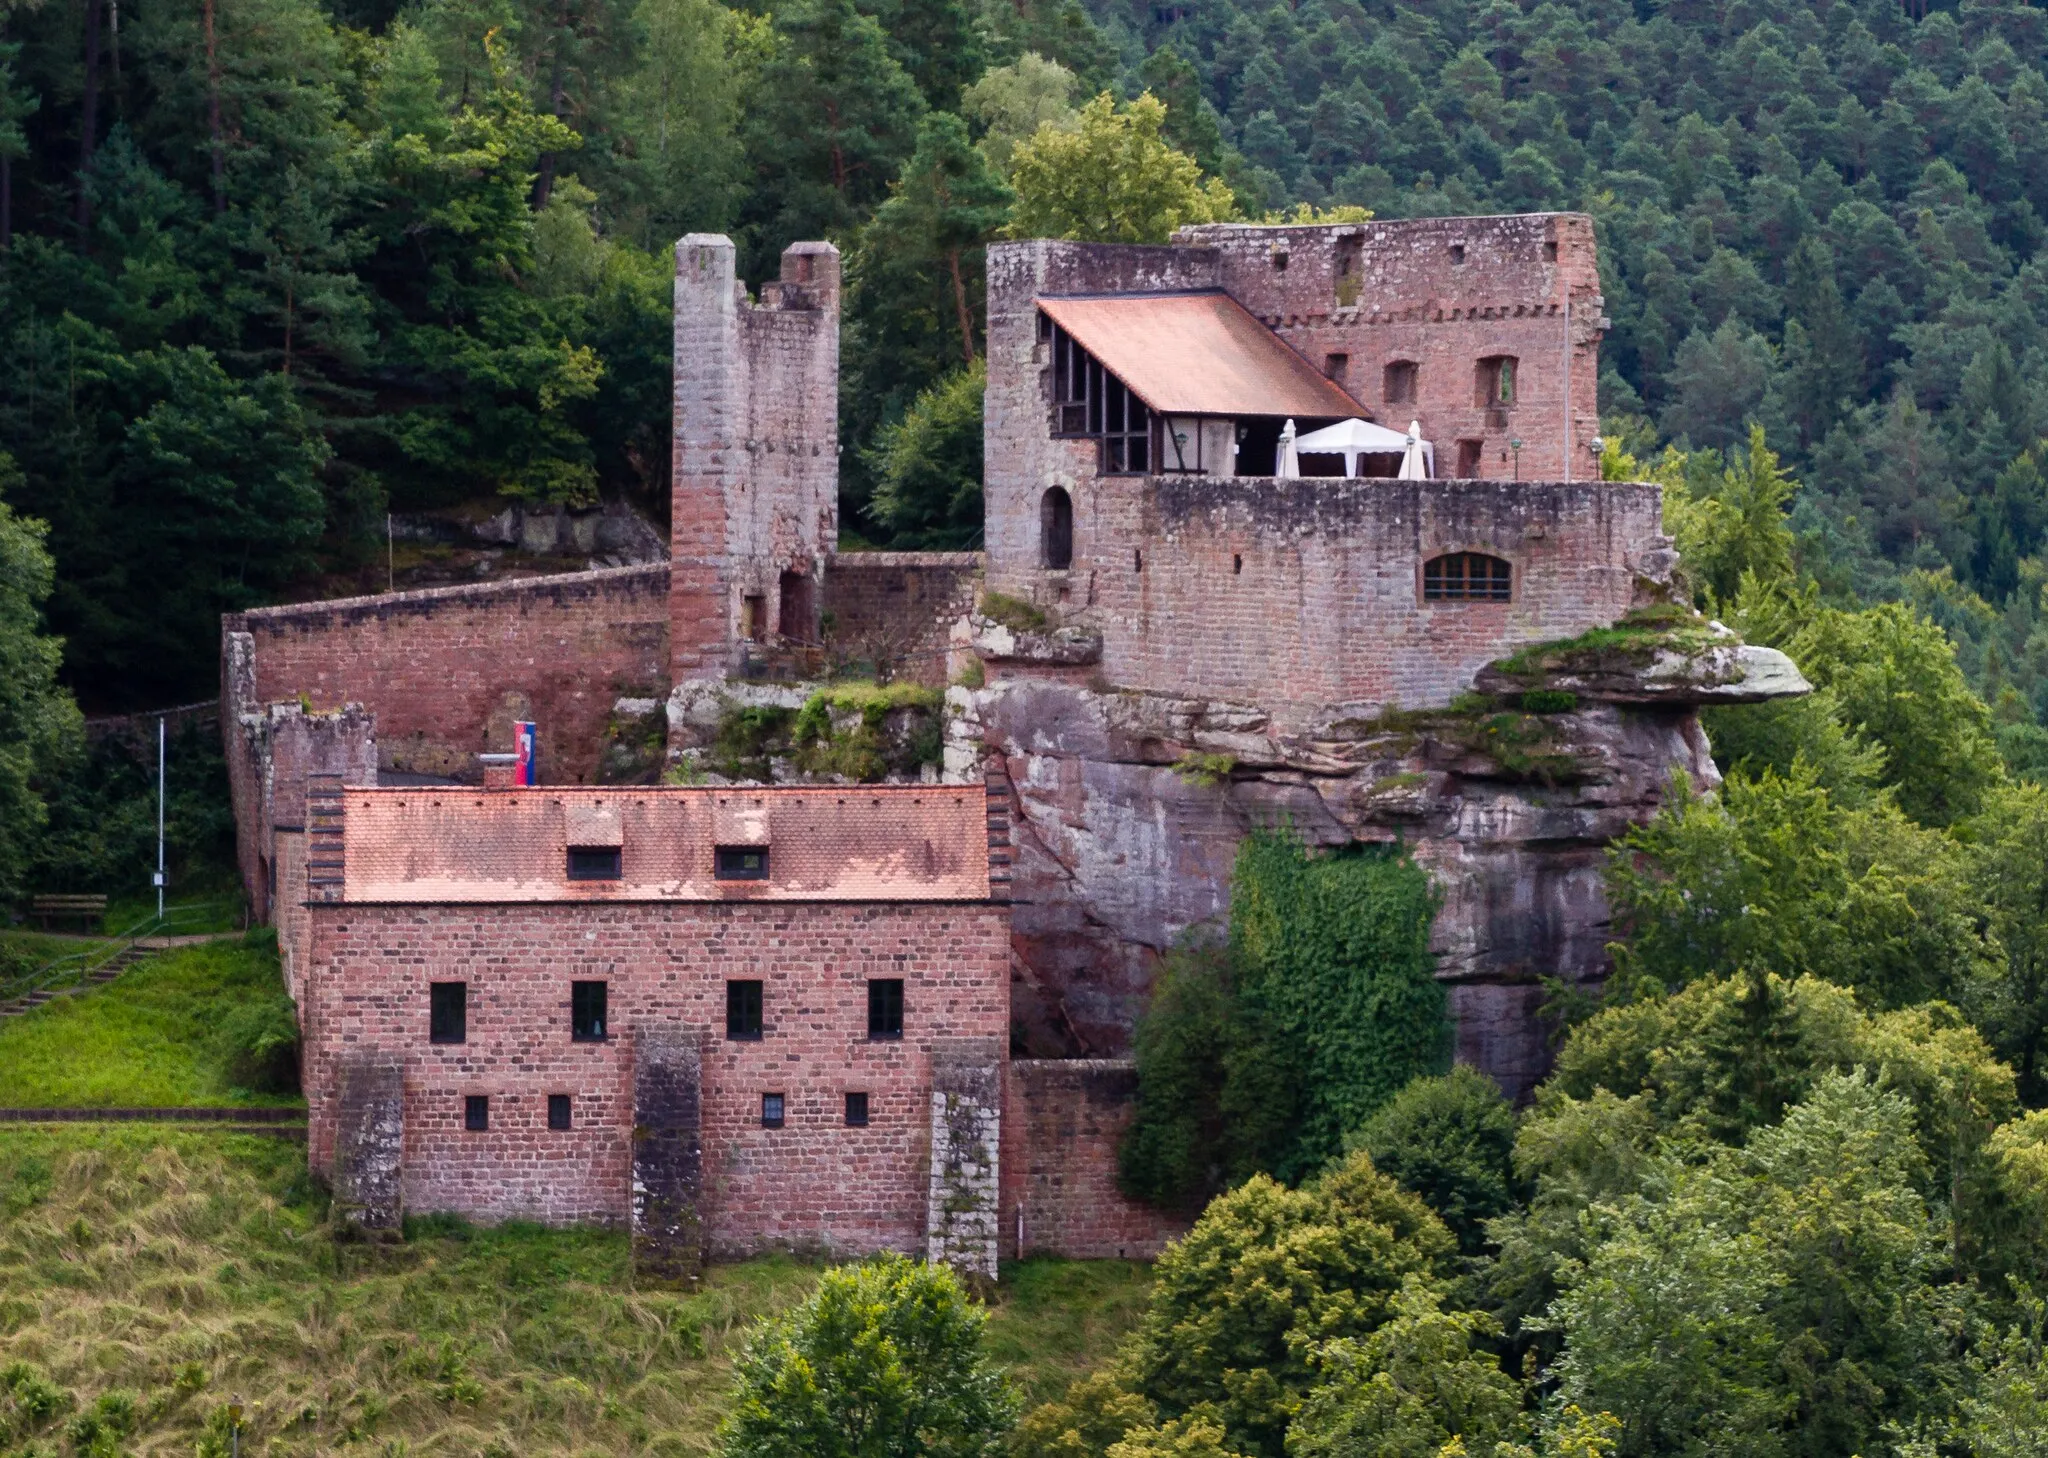 Photo showing: Designation: Monument zone castle ruin Spangenberg
Location: In Elmstein Valley south of Erfenstein (high above the Speyerbach, on the northern slope of the Schlossberg on an overhanging rock face).
Place: Lachen-Speyerdorf, Neustadt an der Weinstraße, Rhineland-Palatinate
Construction time: First mention 1317
Description: Vassal castle of the Bishopric of Speyer, 1470 destroyed, new pawning 1480 and reconstruction. Decline since the destruction in the 17th century, 1926/27 measures at the upper castle, since 1972/73 gradual expansion of the terraced complex.
Parts of the upper castle has been preserved, little remains of the middle castle and lower castle with older tower and younger gatehouse.